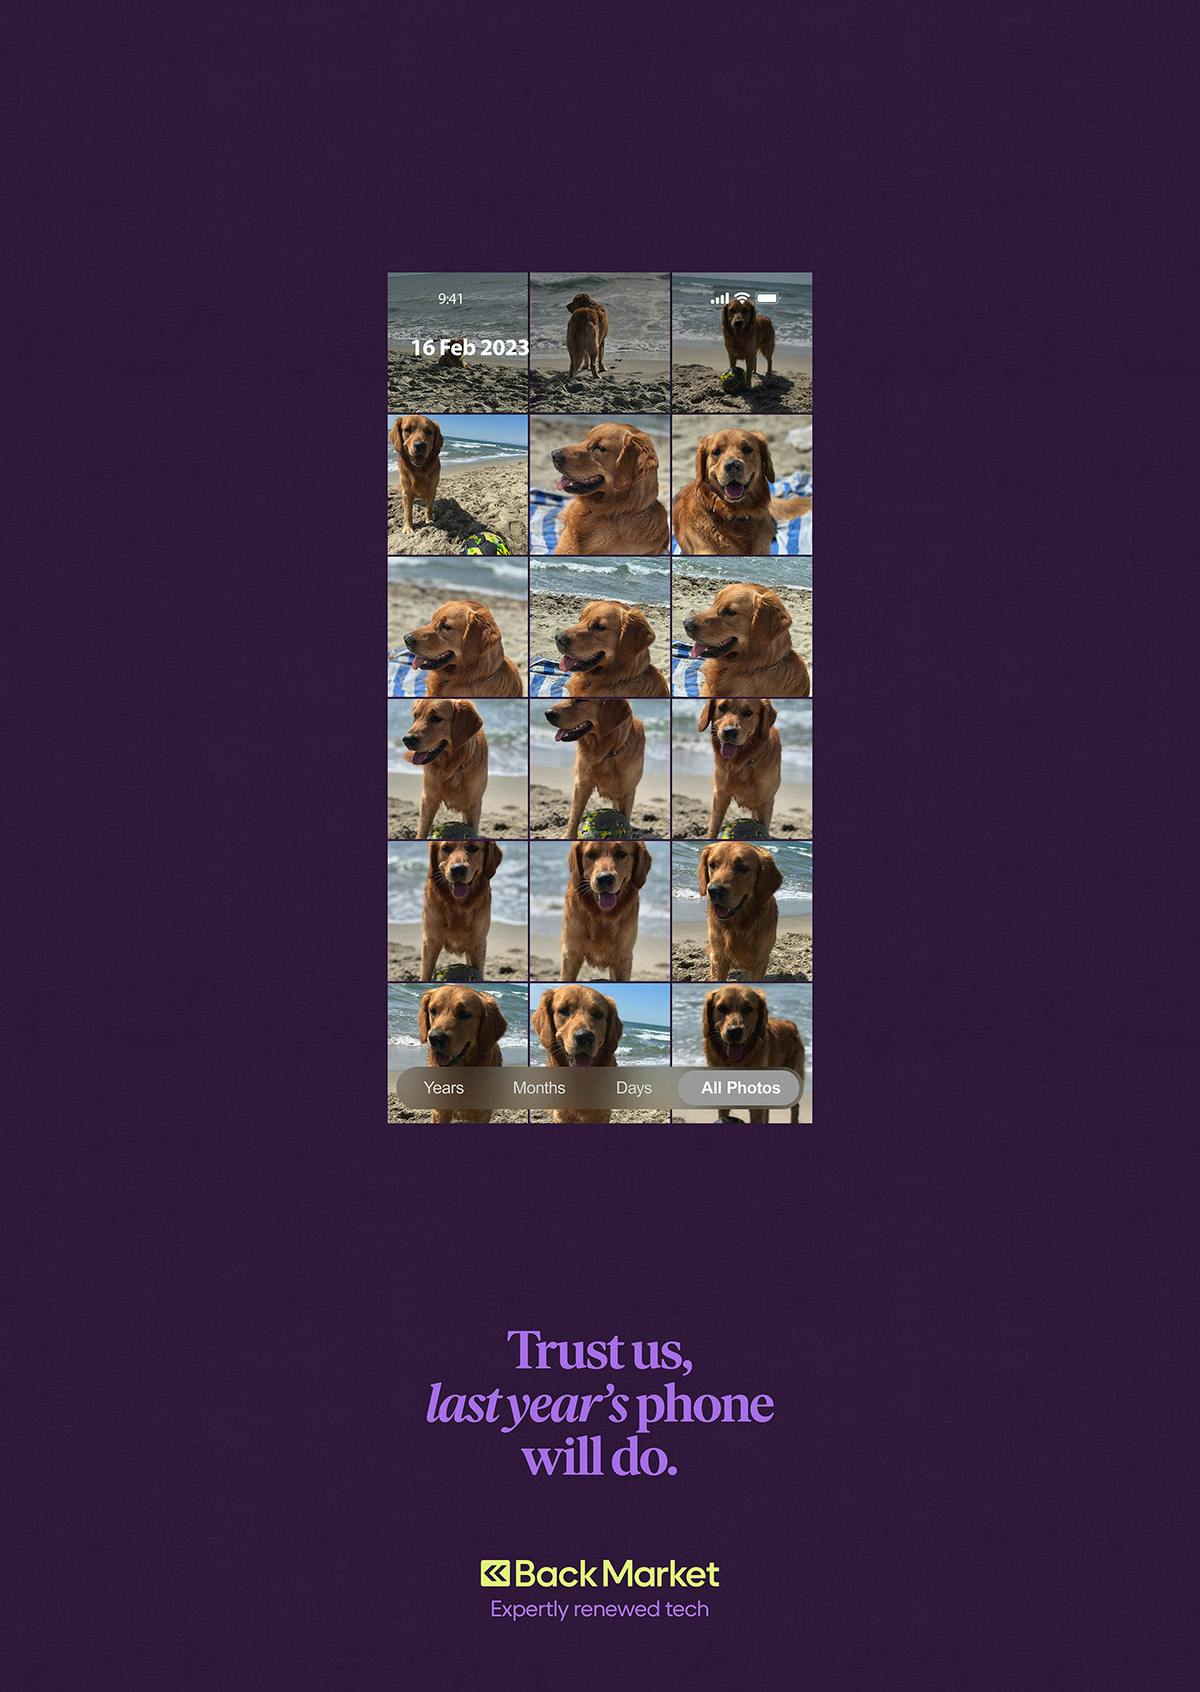 Image from Back Market's campaign showing a picture of a camera roll filled with near identical photos of a dog, and the headline 'Trust us, last year's phone will do' on a dark purple background